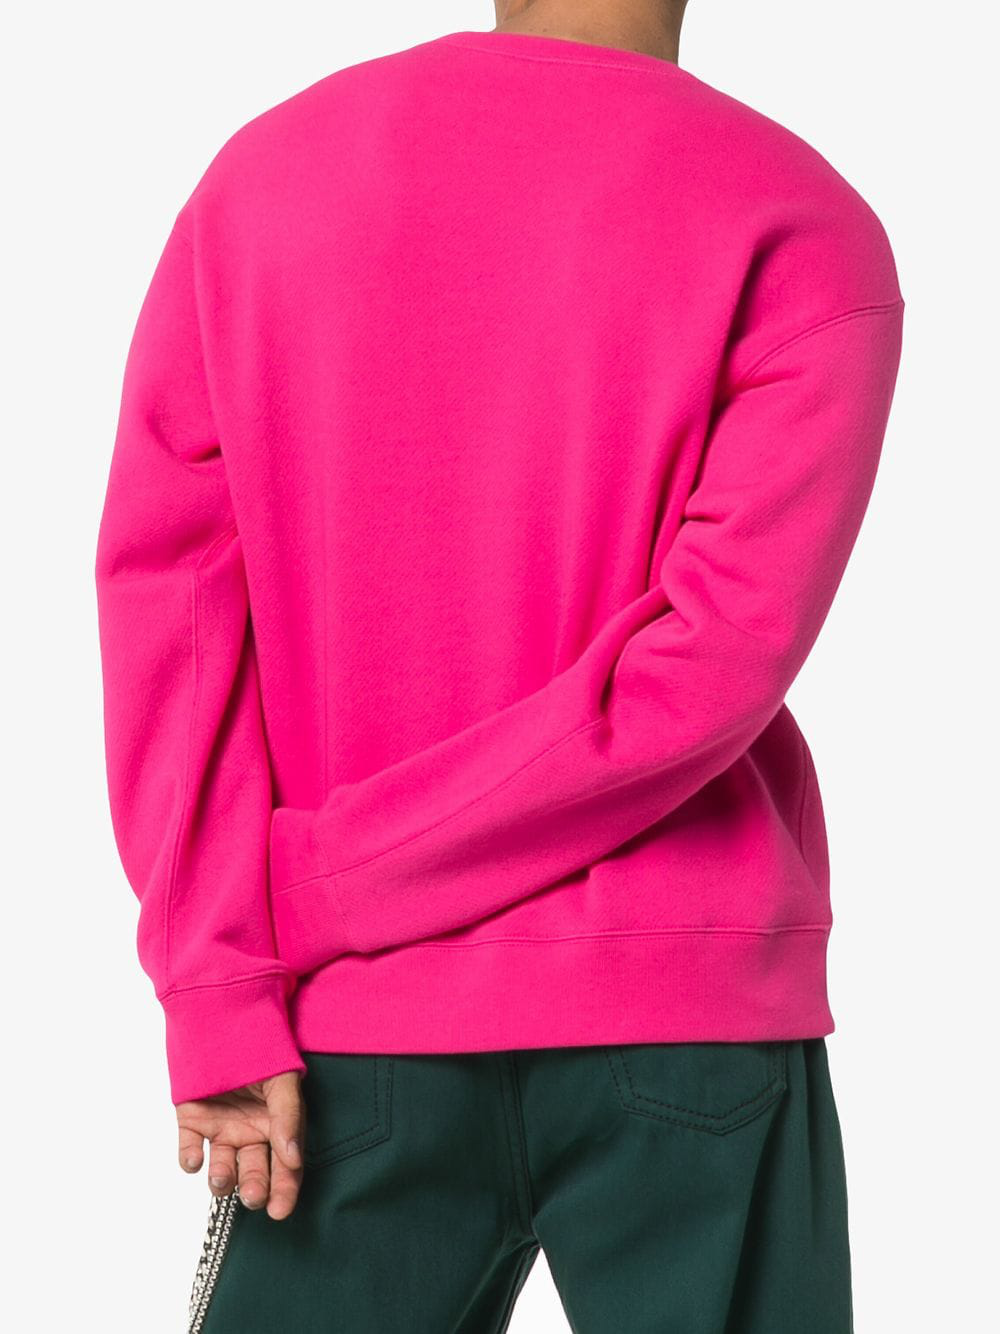 gucci 80s patch sweater